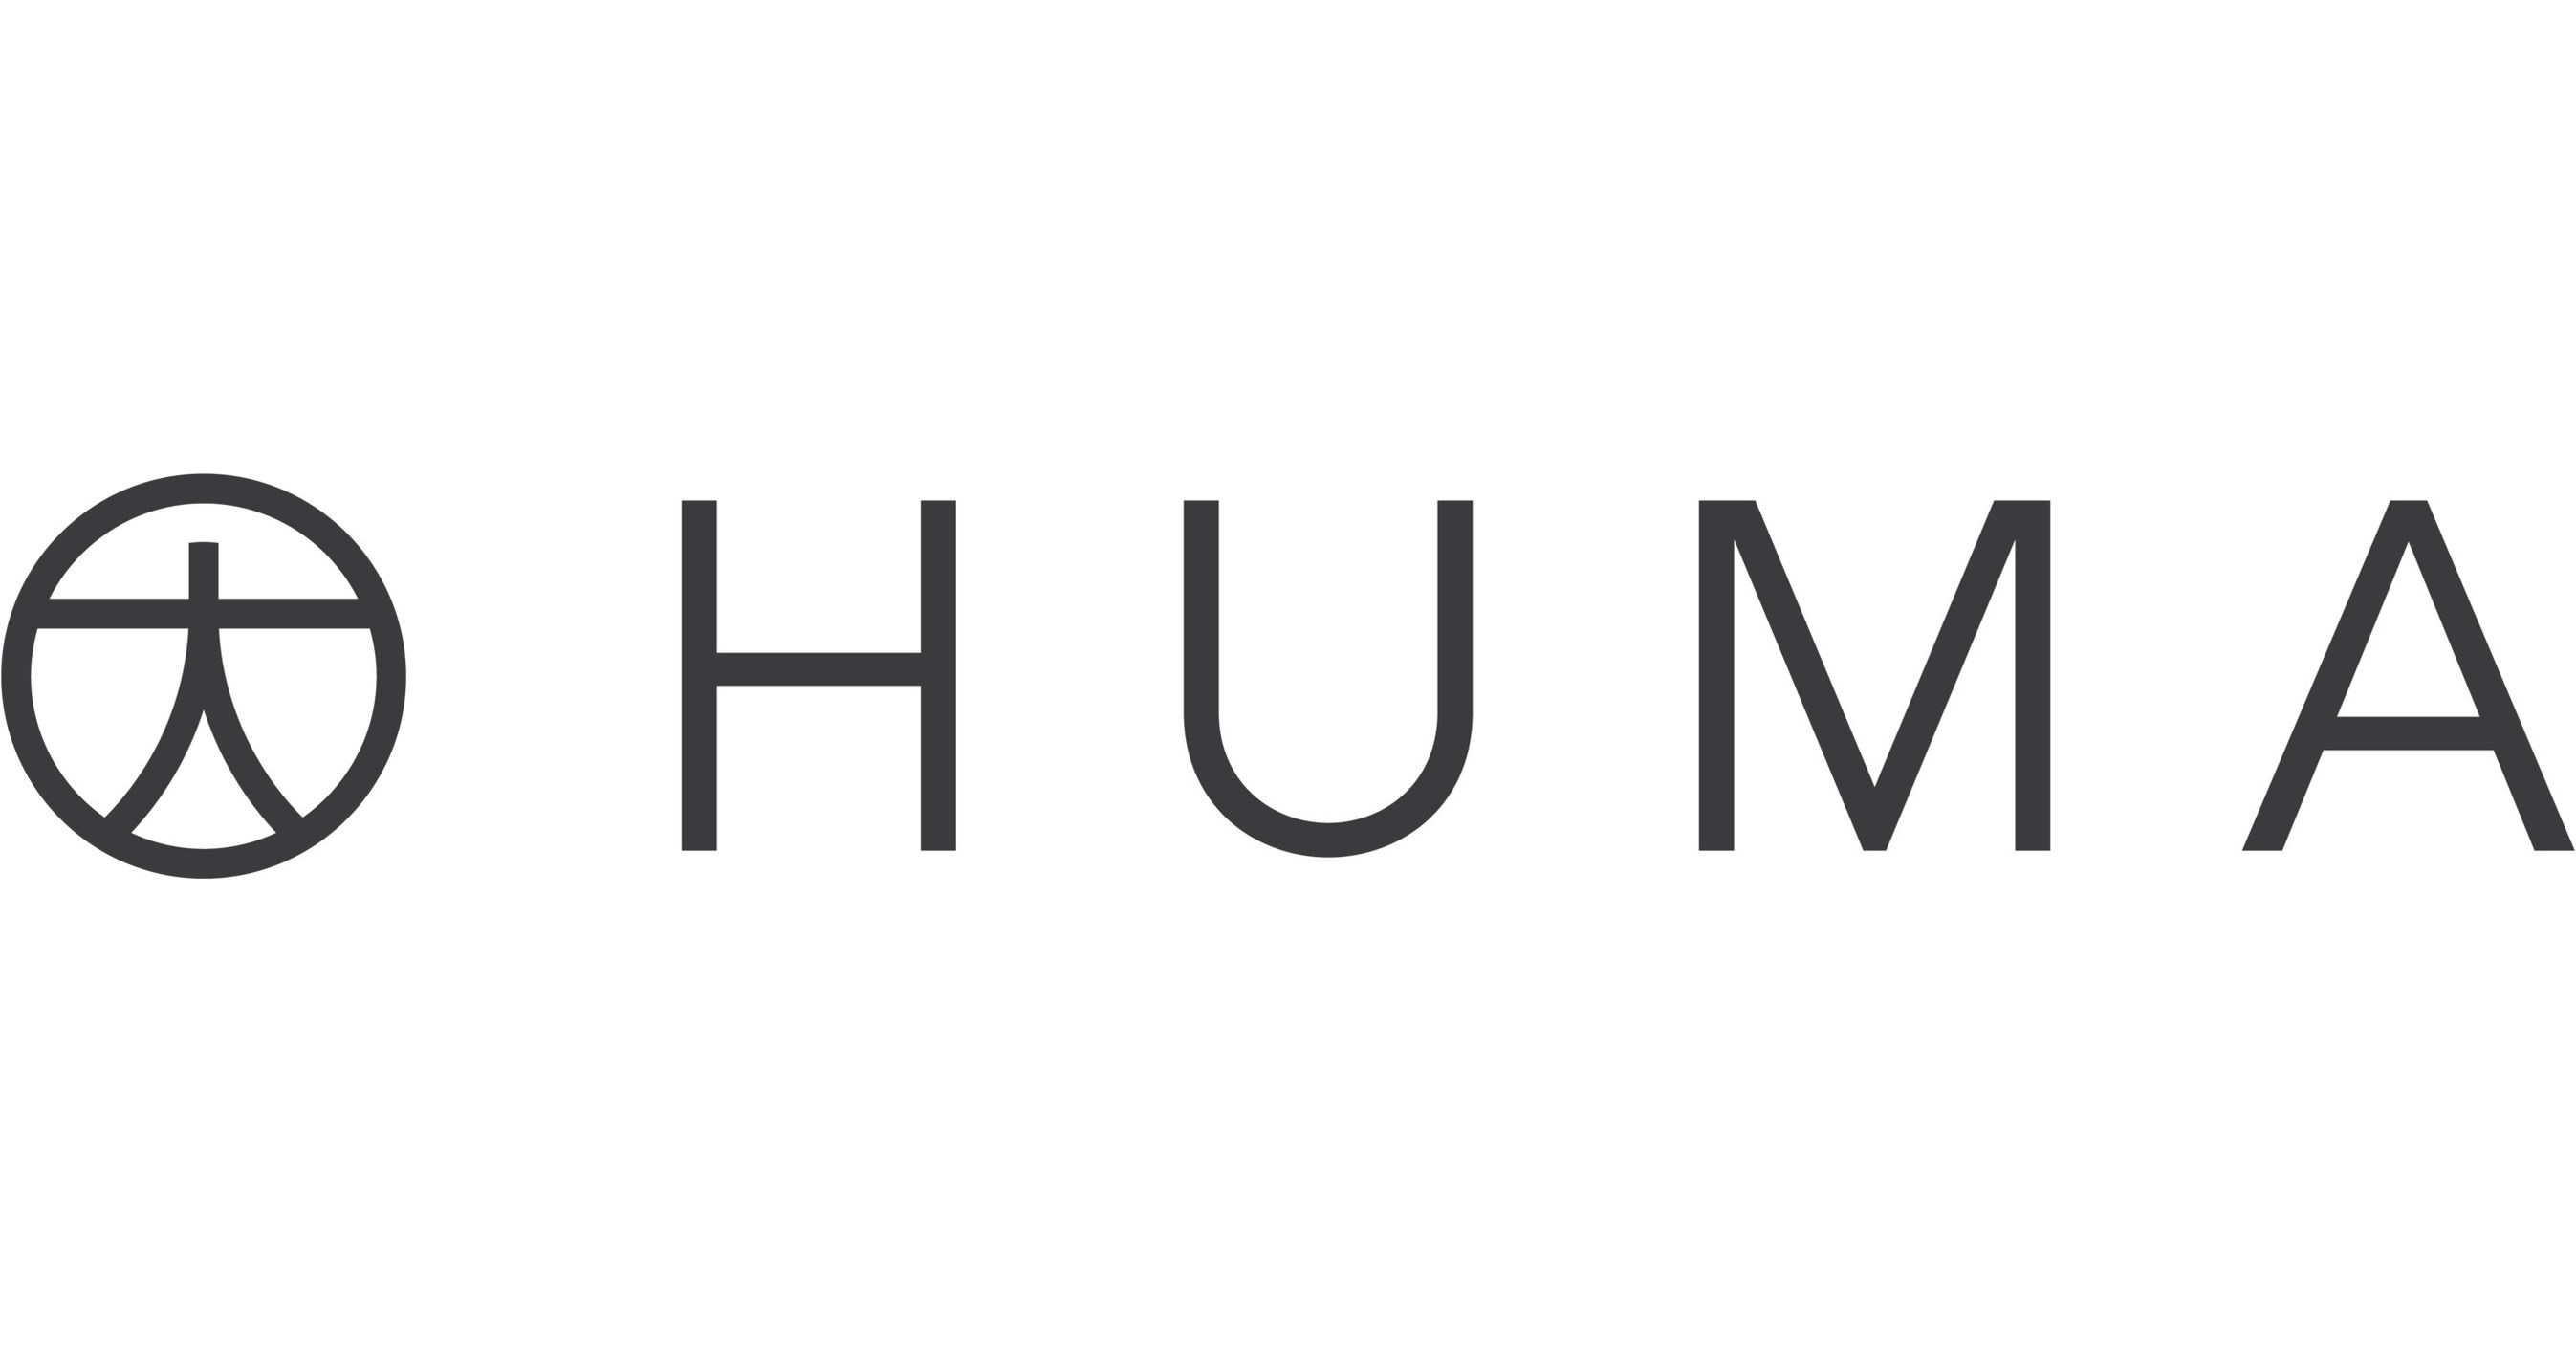 Huma raises $130 million financing to scale its digital health platform for better care and research